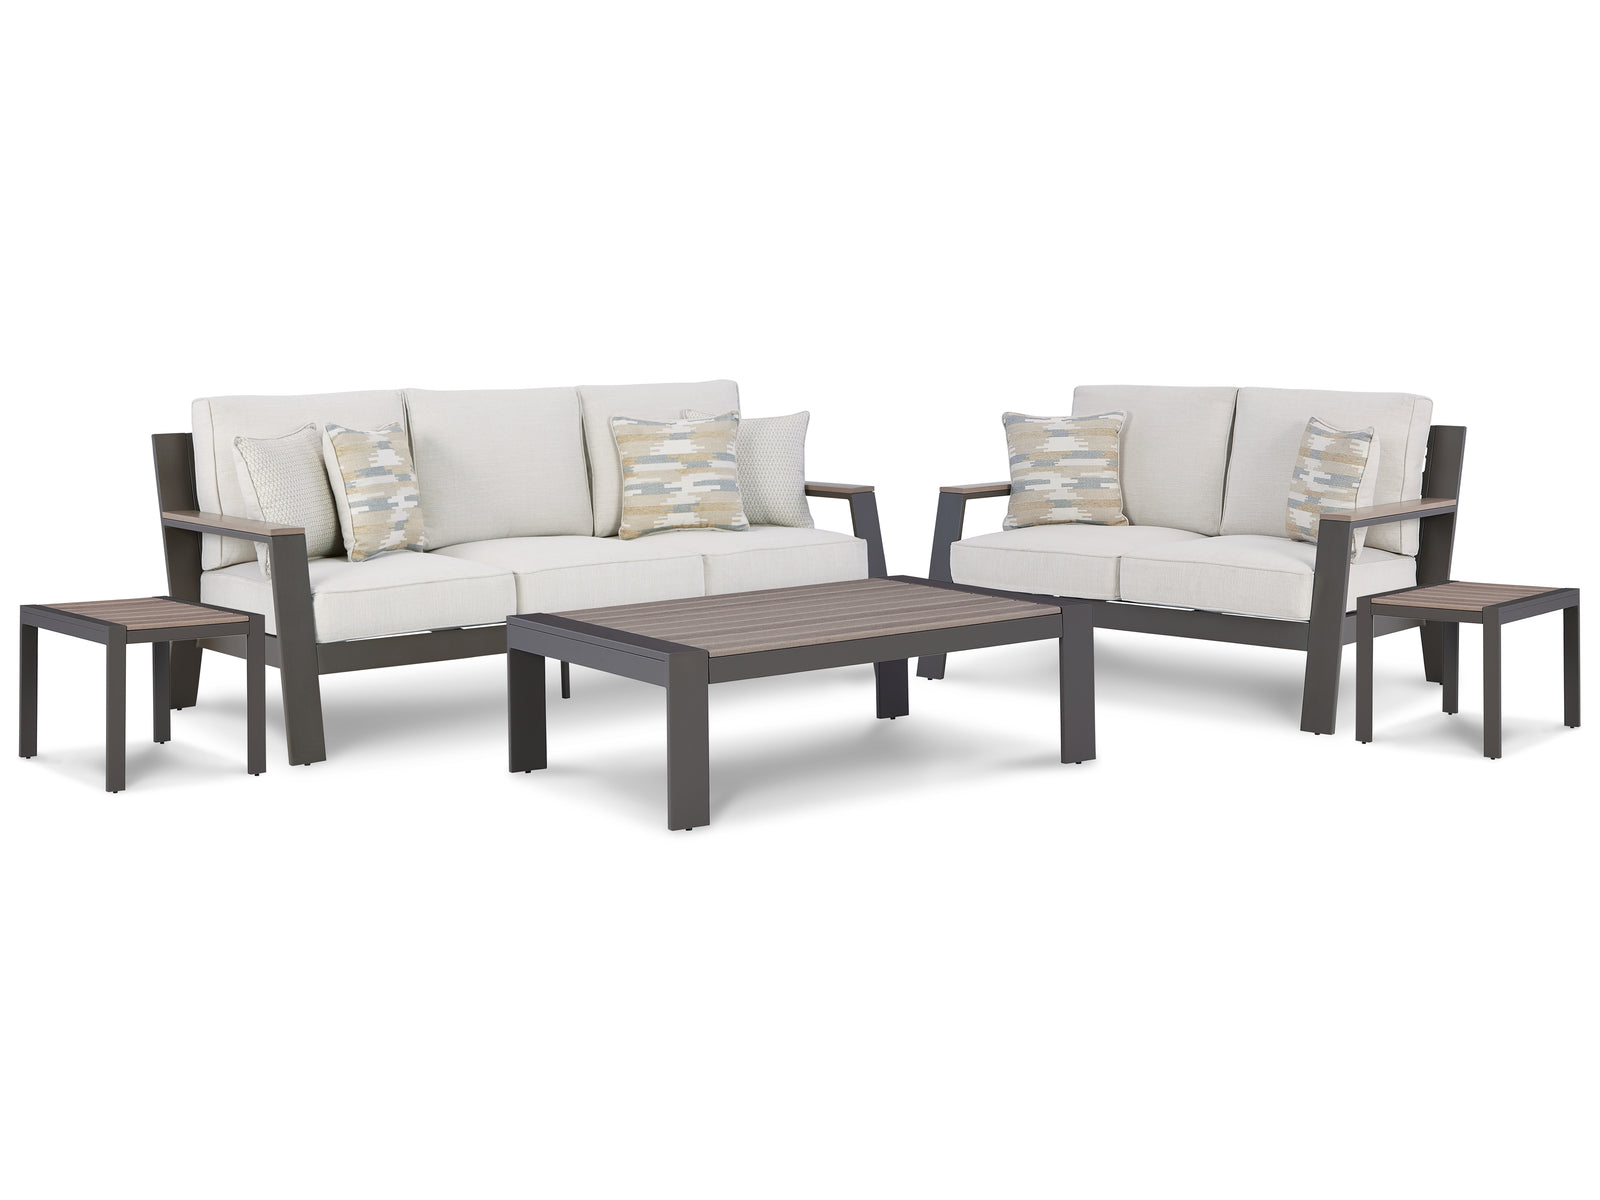 Tropicava Taupe/white Outdoor Sofa And Loveseat With Coffee Table And 2 End Tables